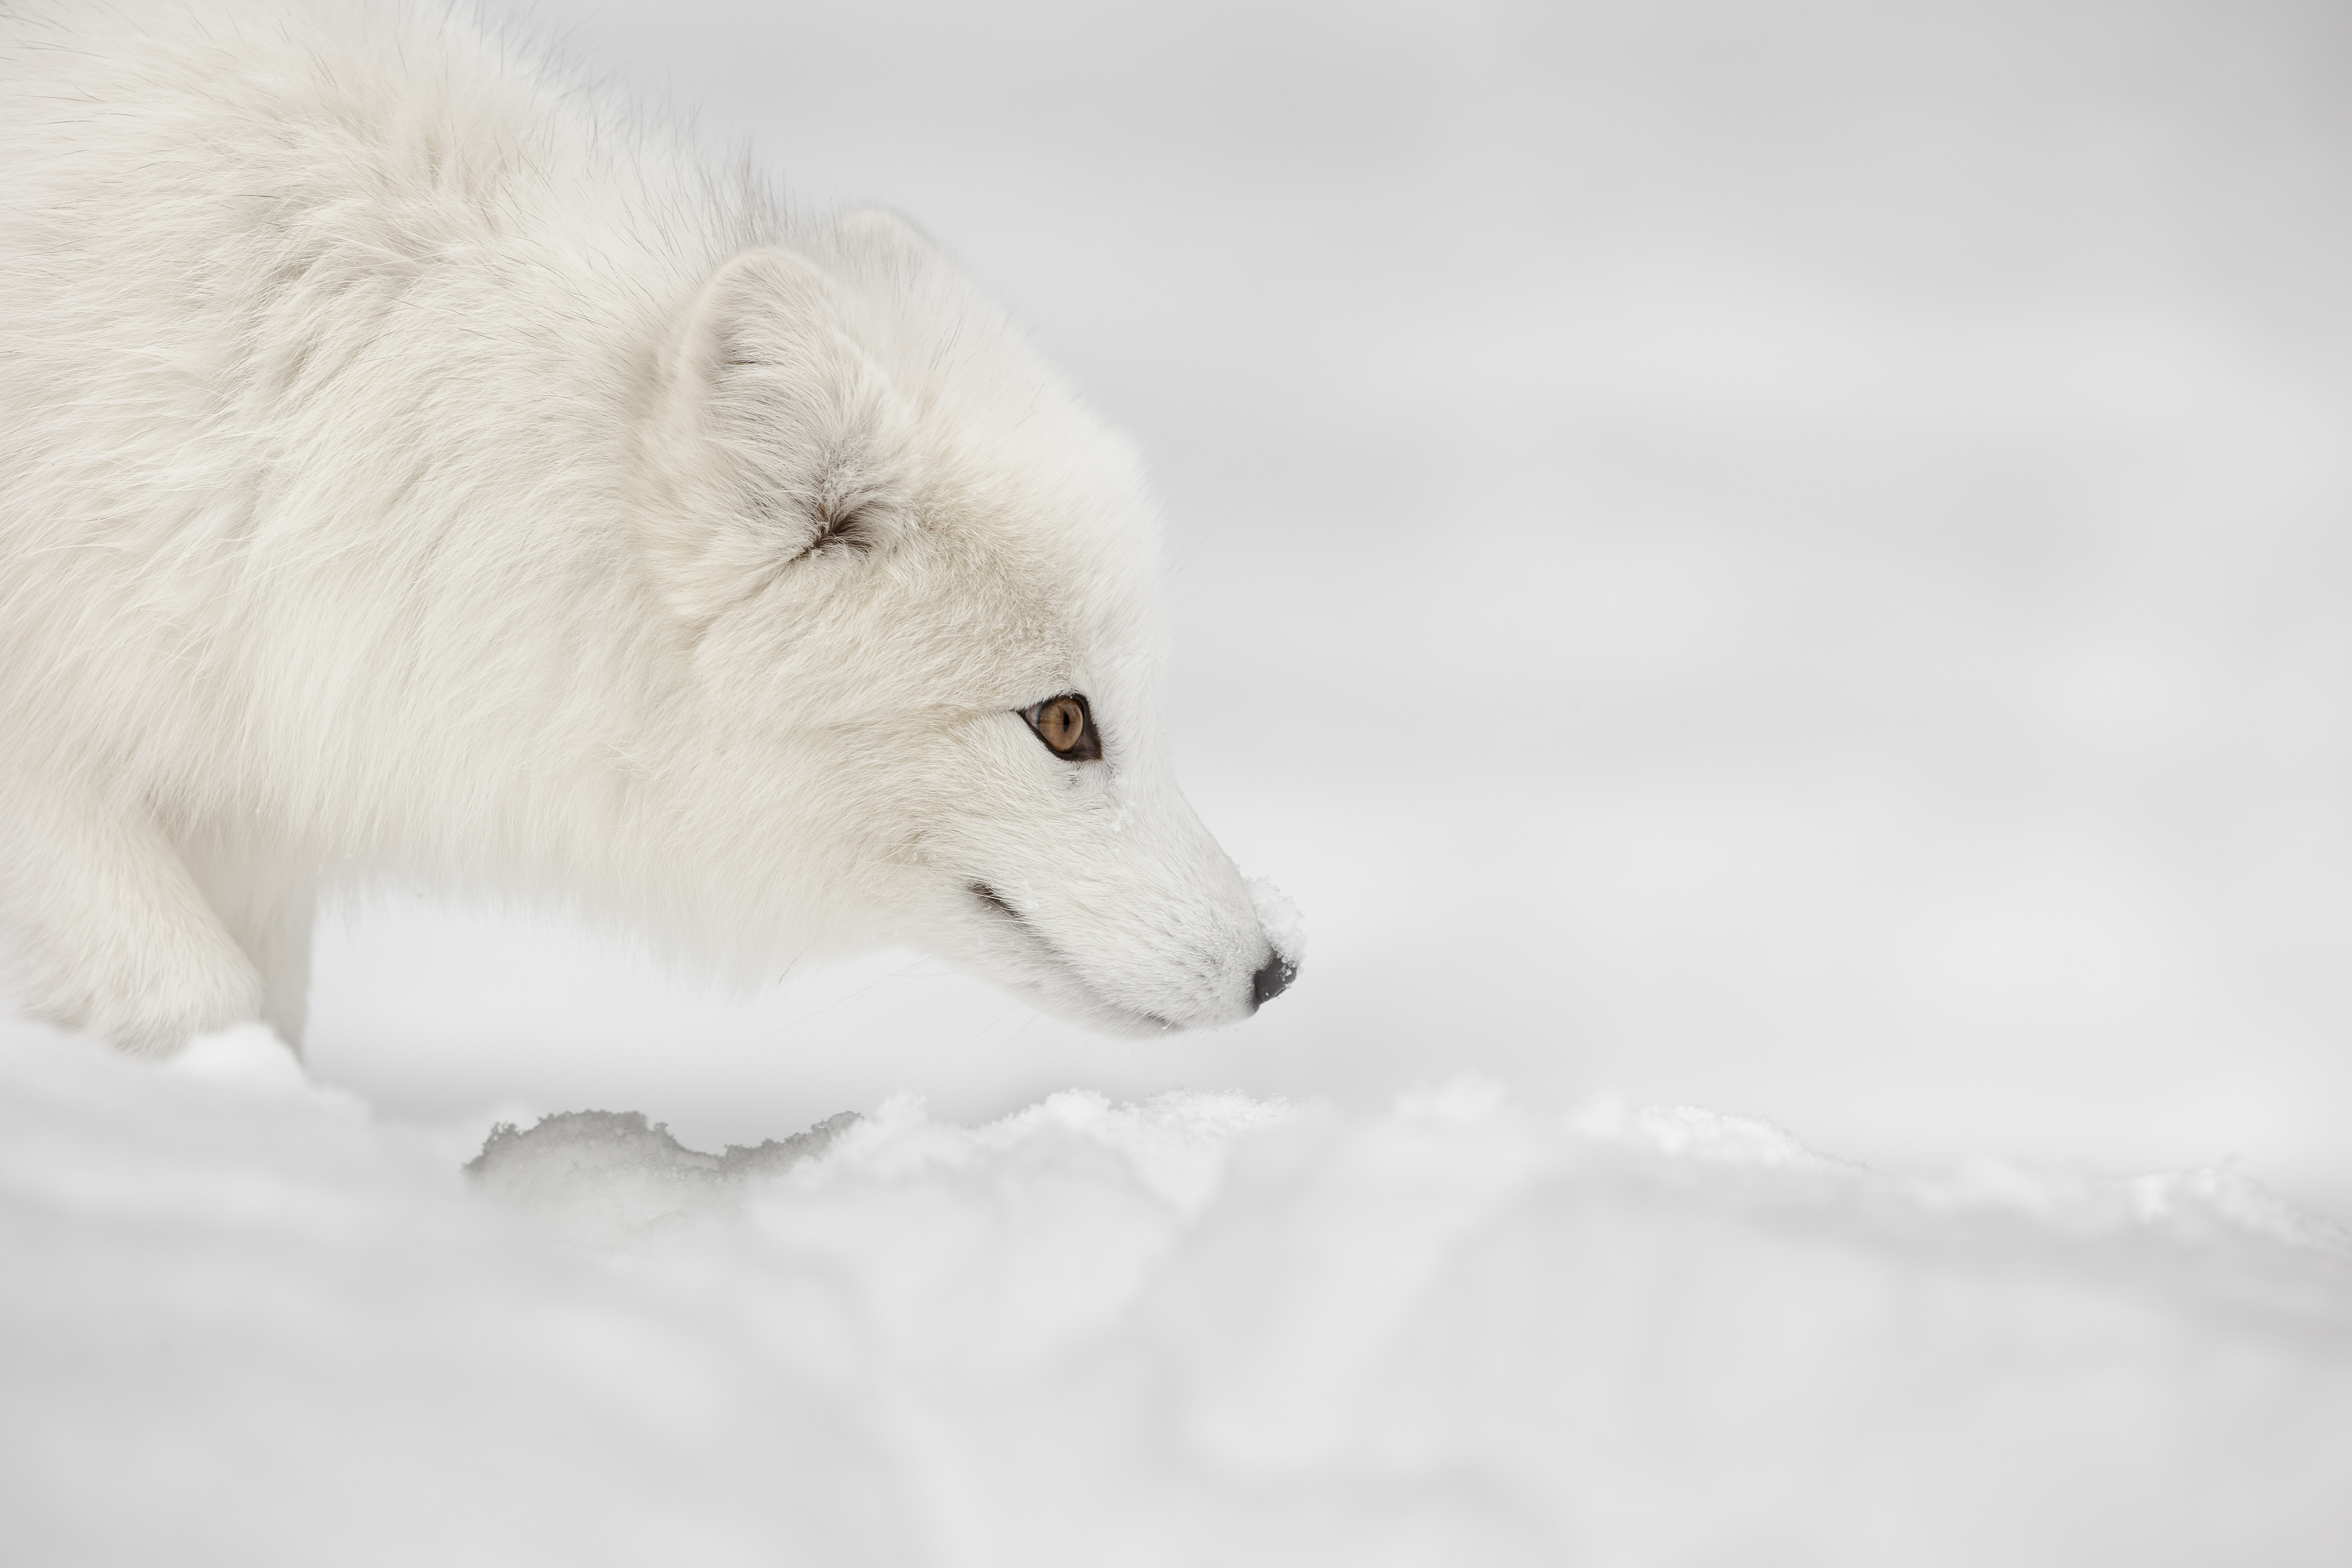 Arctic Animals' Movement Patterns are Shifting in Different Ways